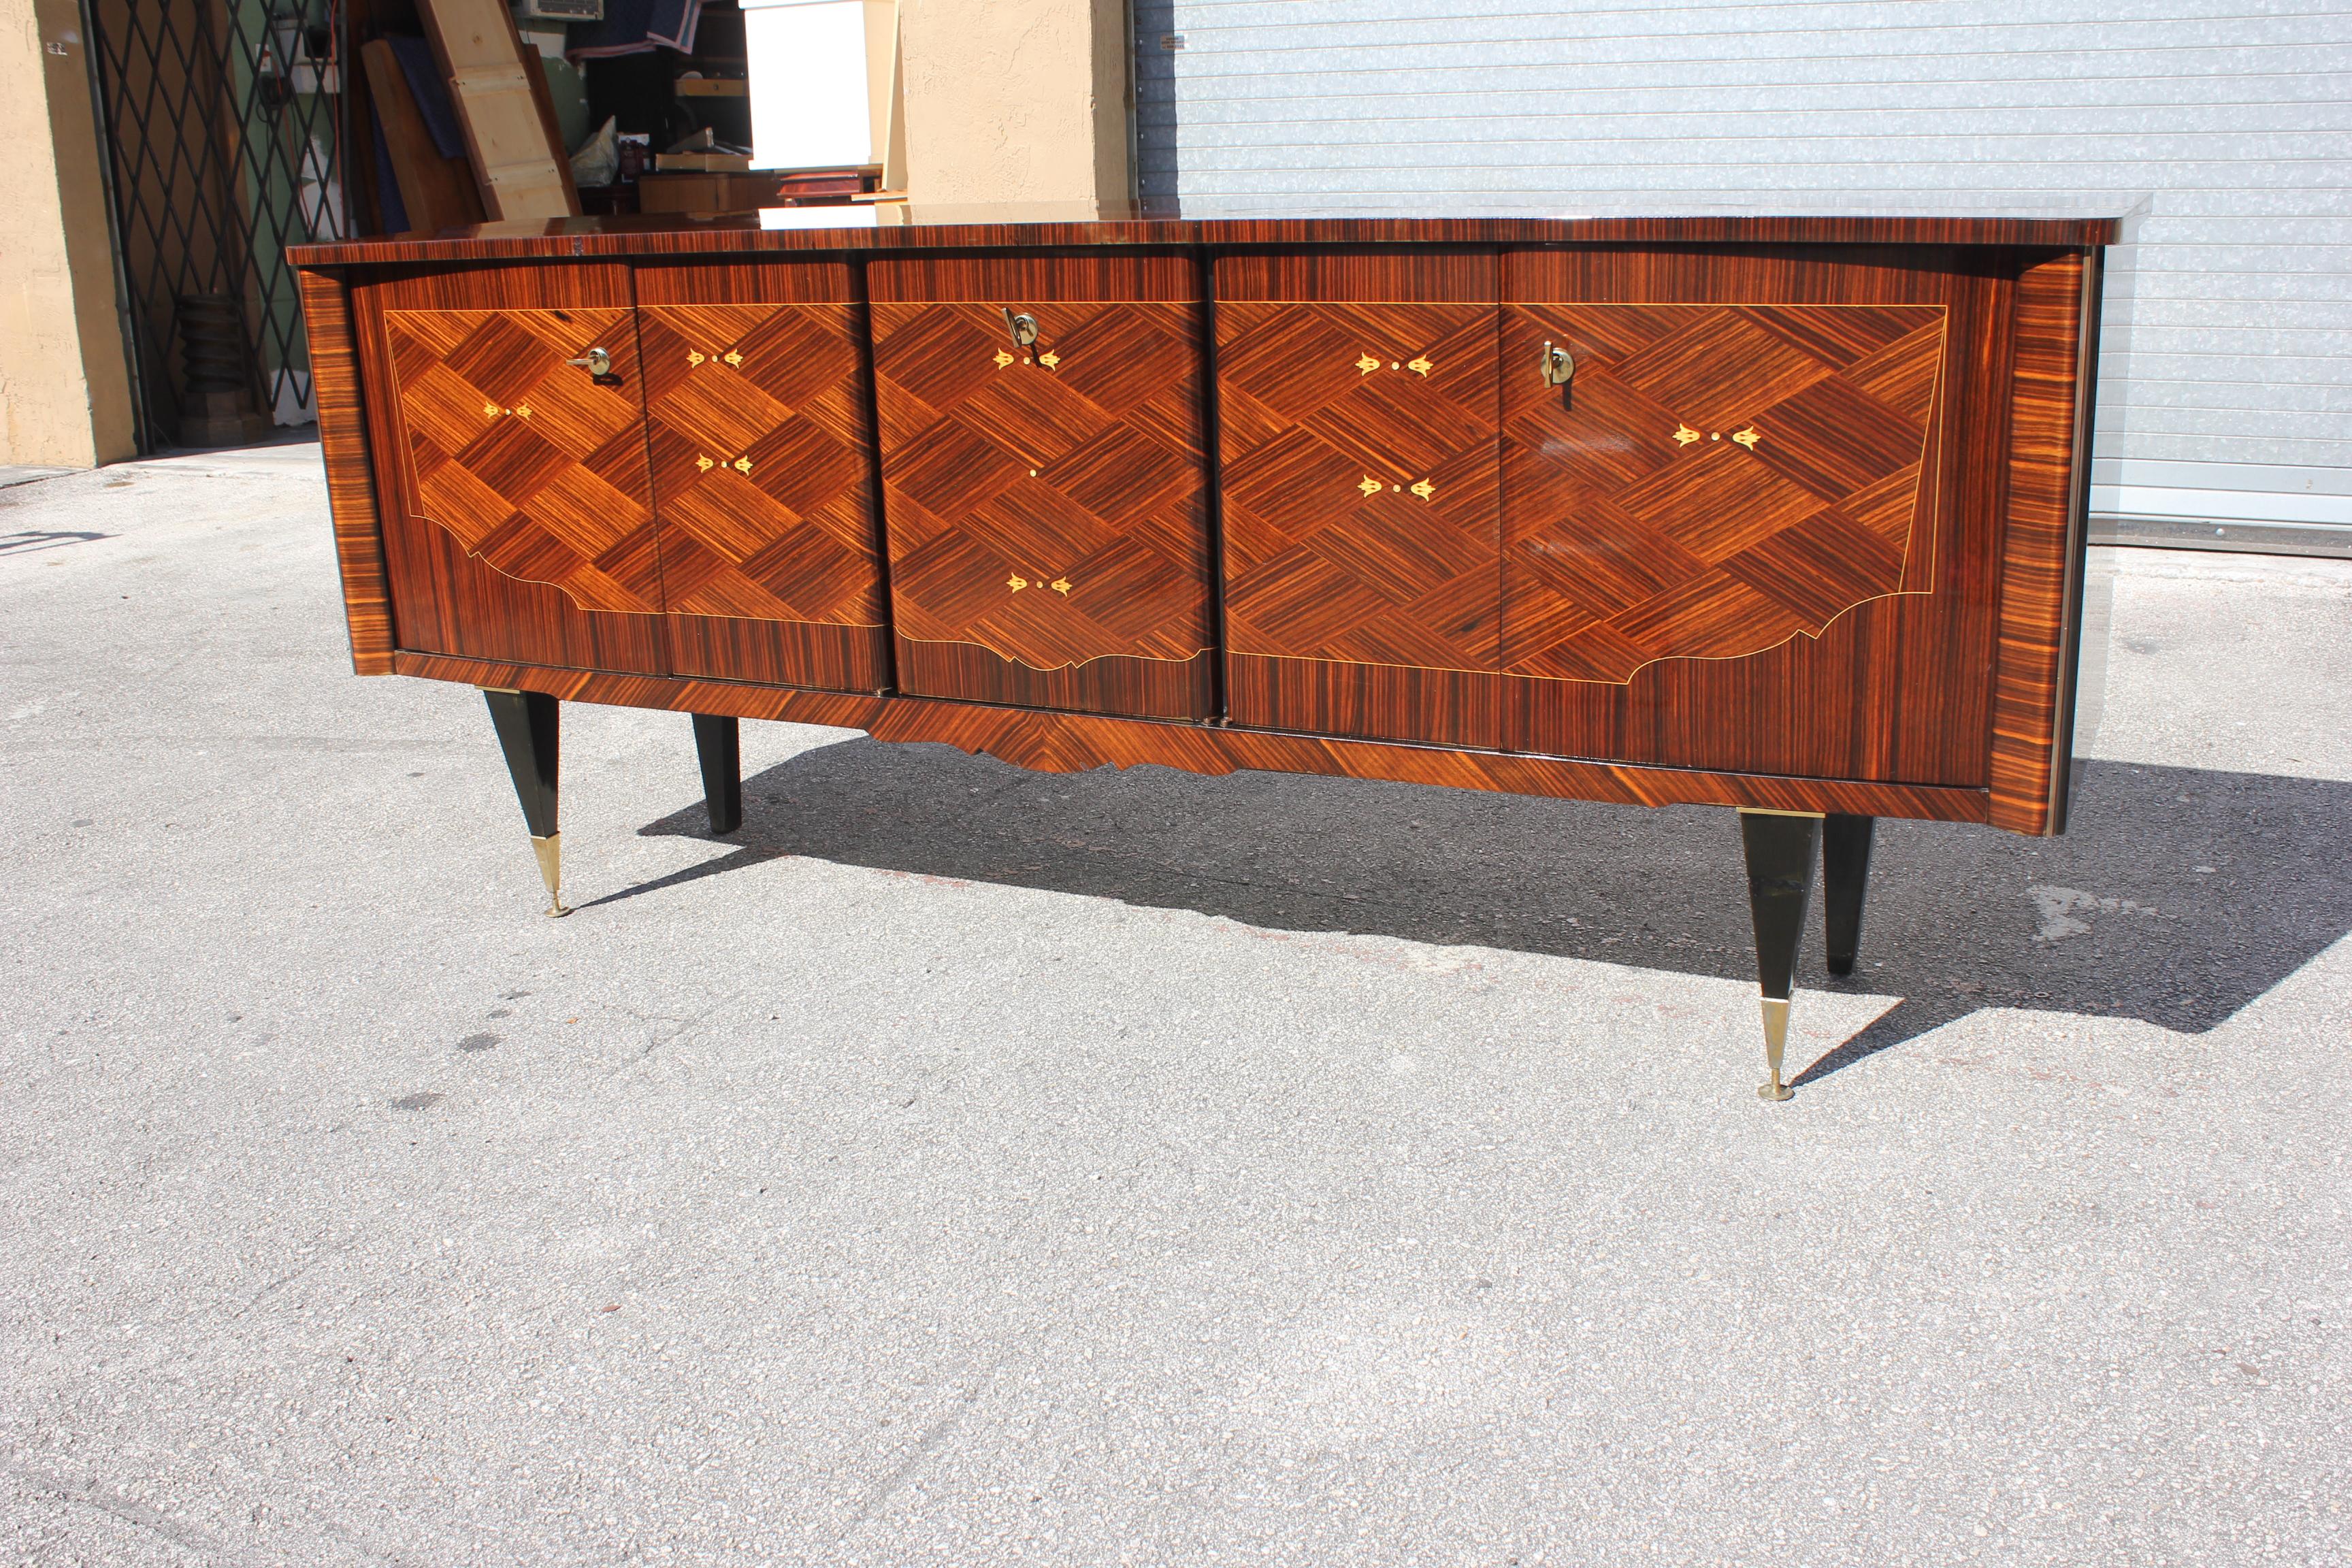 Long French Modern Macassar Ebony Sideboard / Buffet / Bar / Credenzas In Excellent Condition For Sale In Hialeah, FL